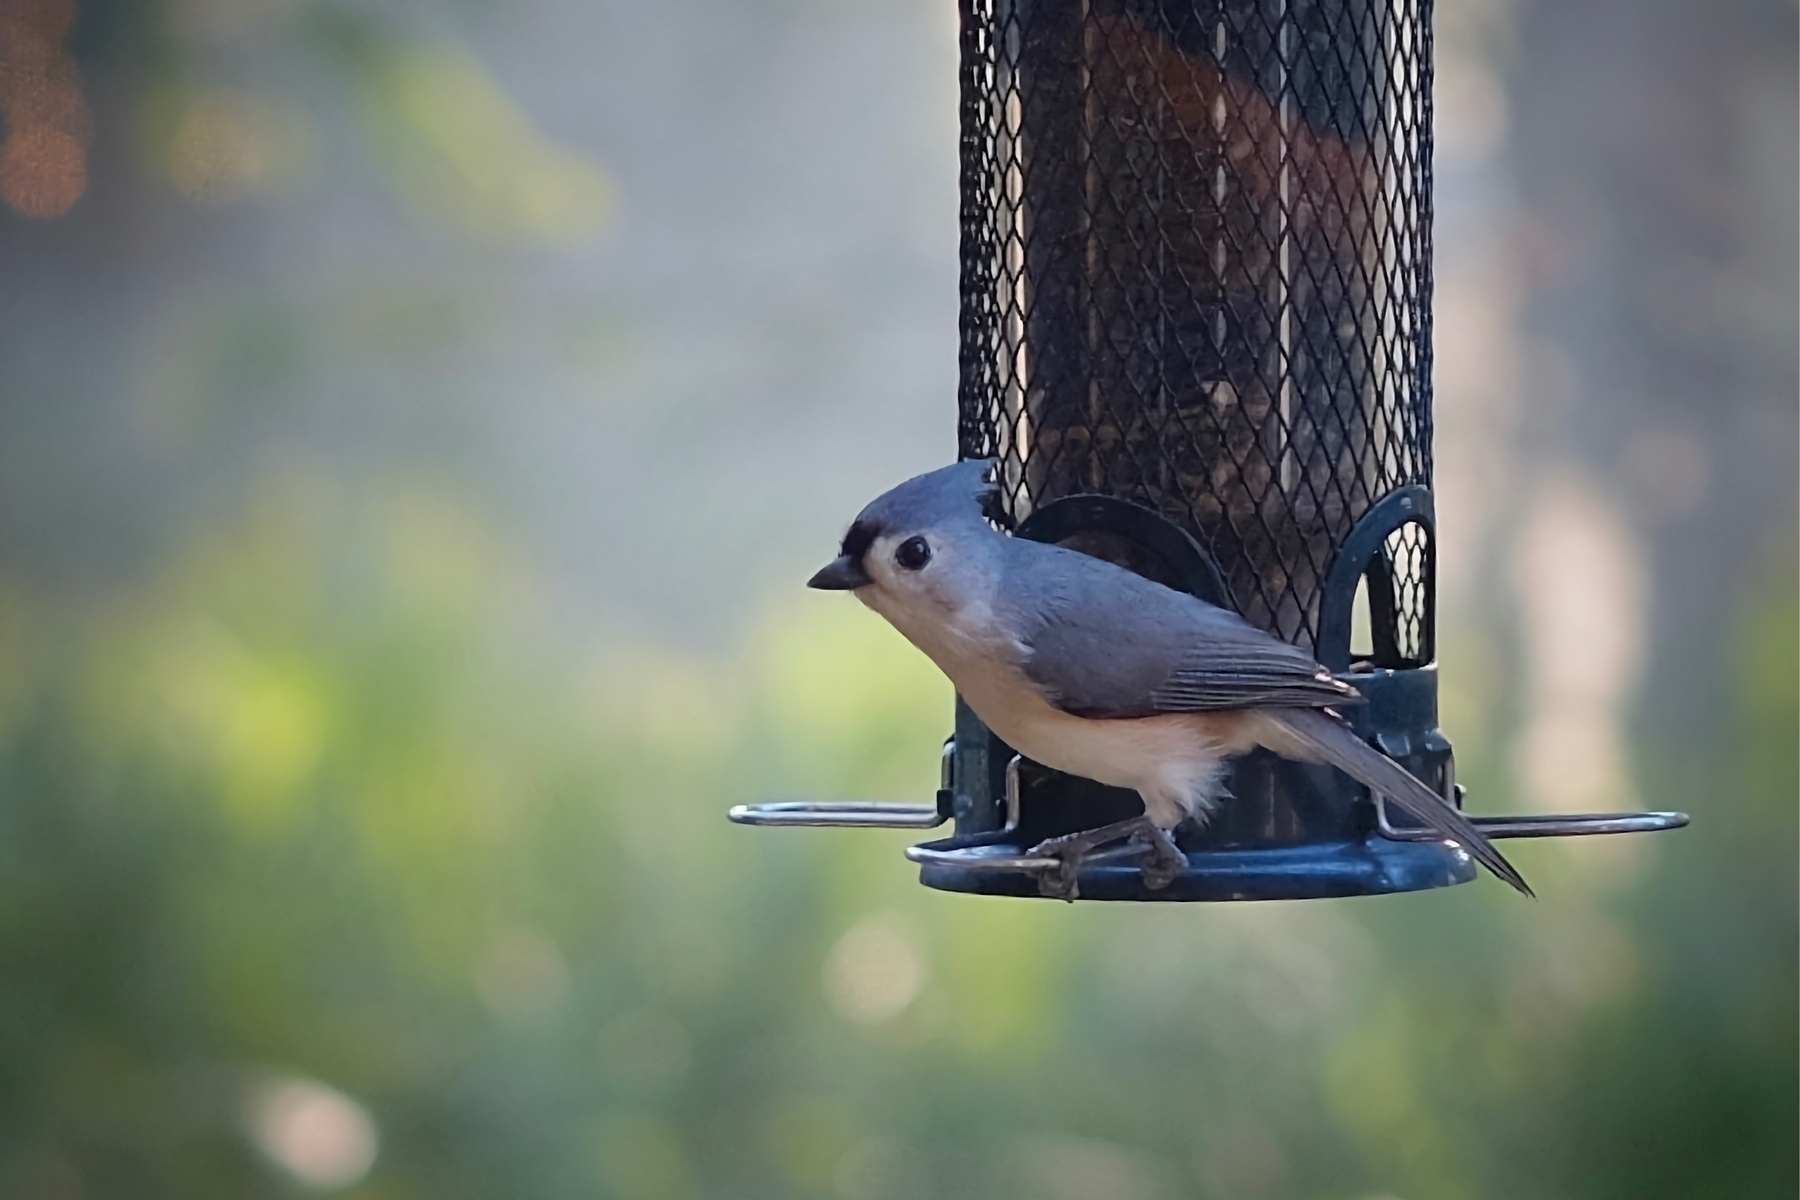 Titmouse bird standing at seed feeder